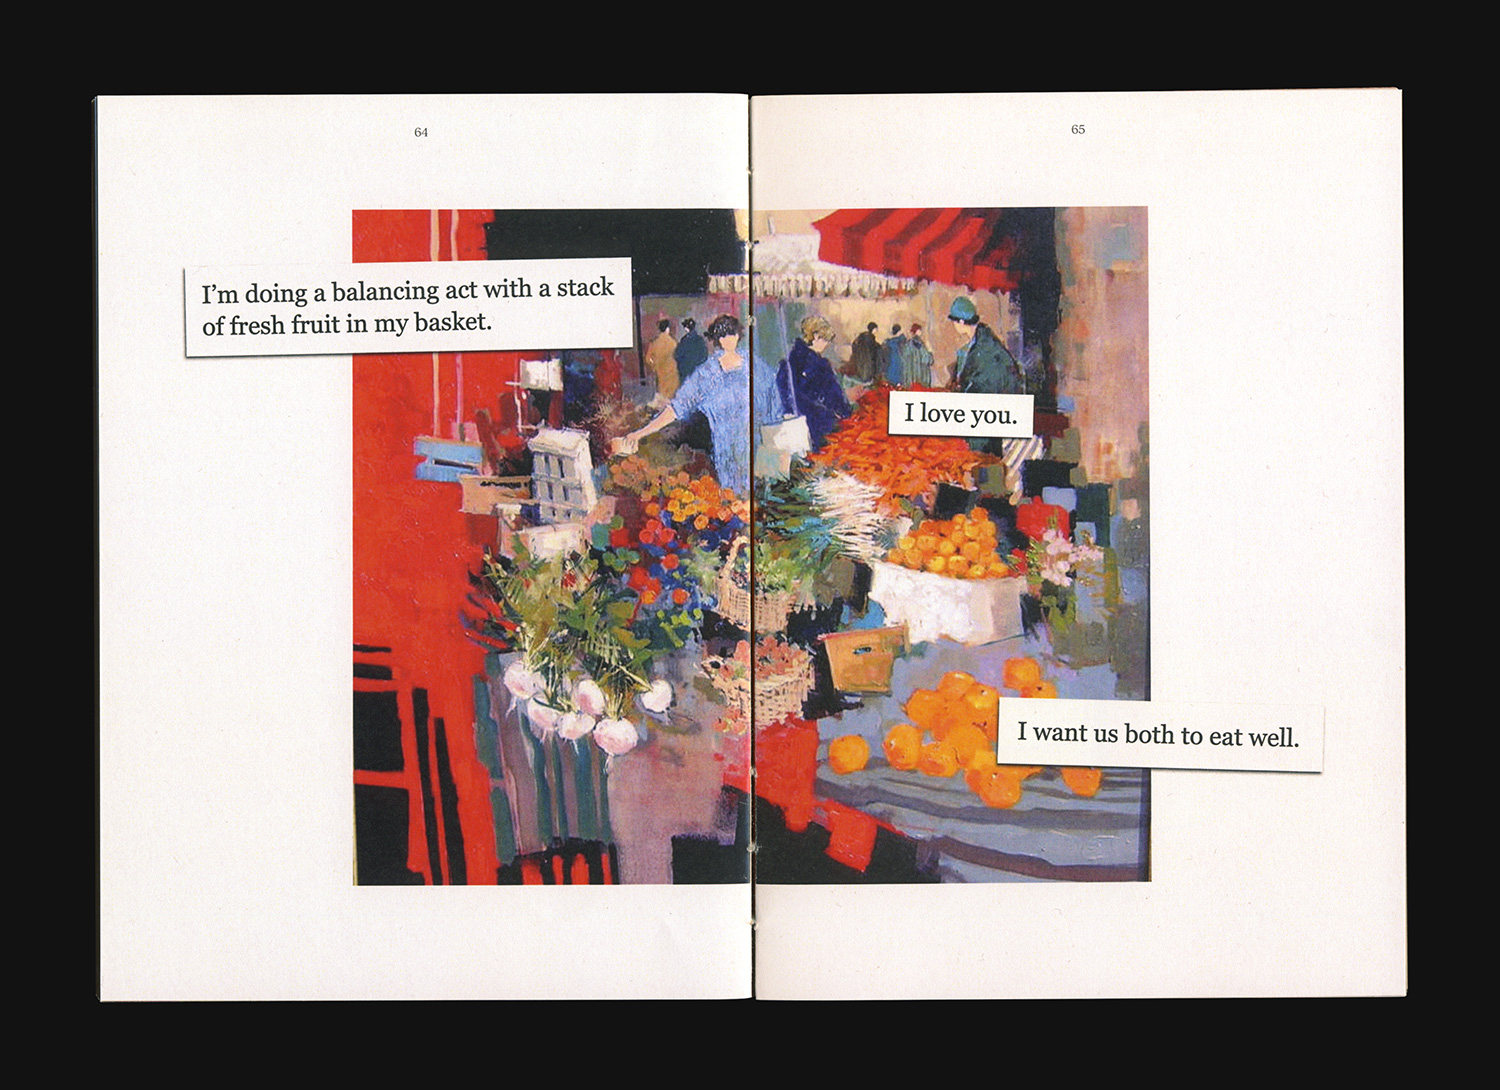 Book spread with text and a painting.